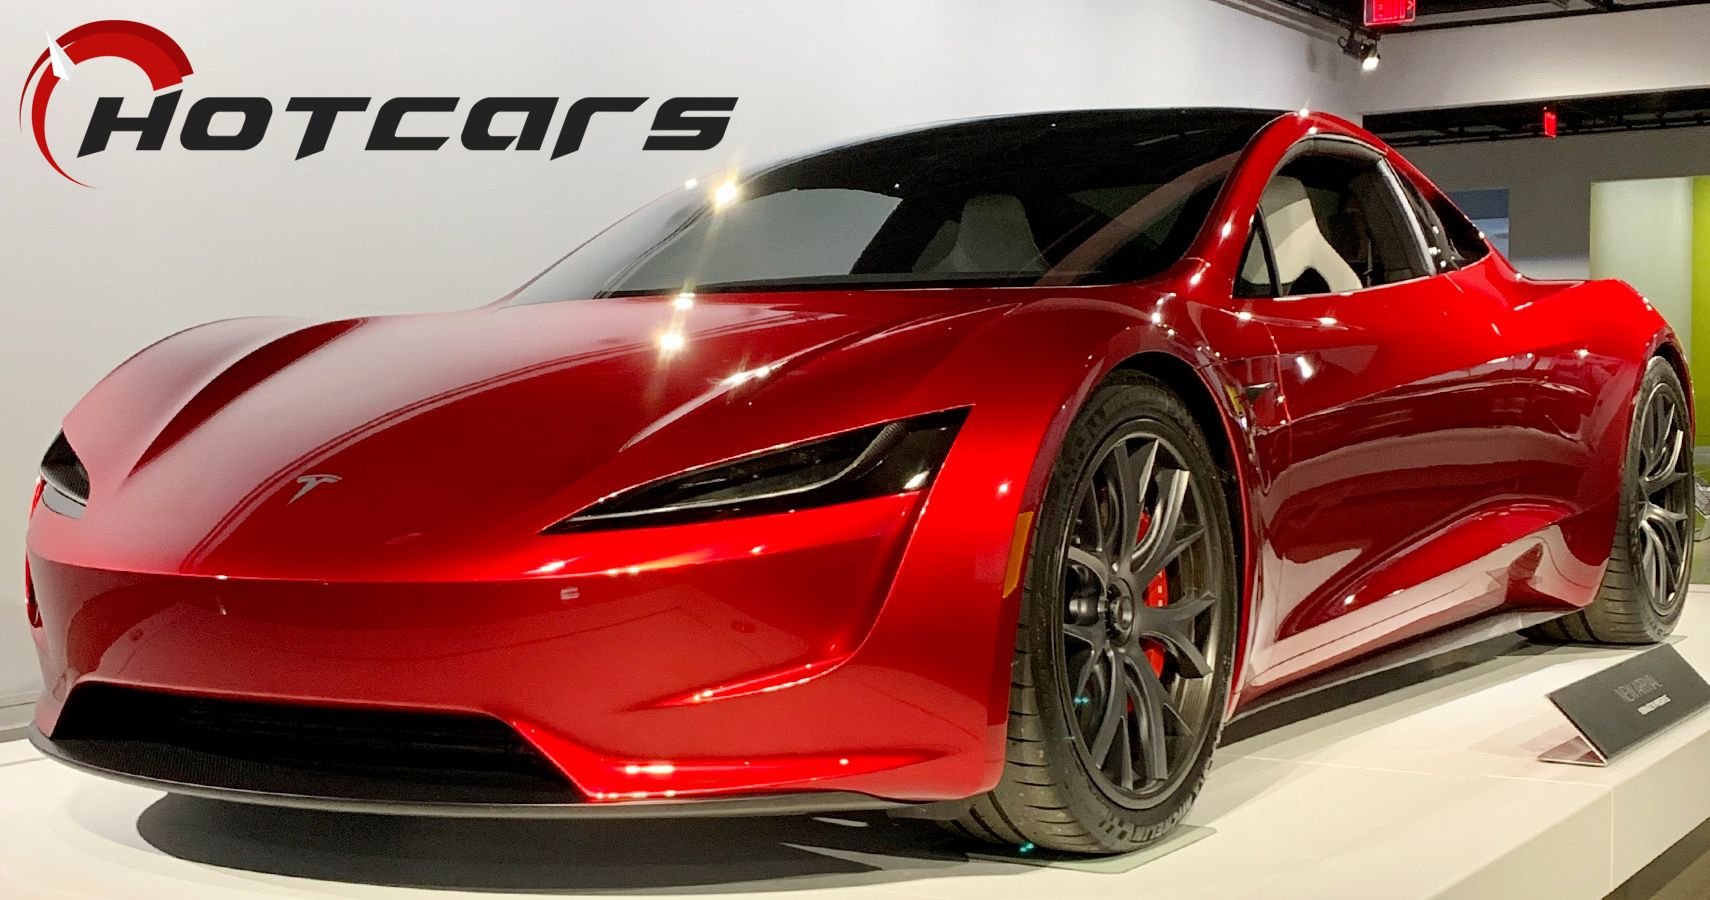 EXCLUSIVE: First Shots Of The New Tesla Roadster At The Petersen Museum